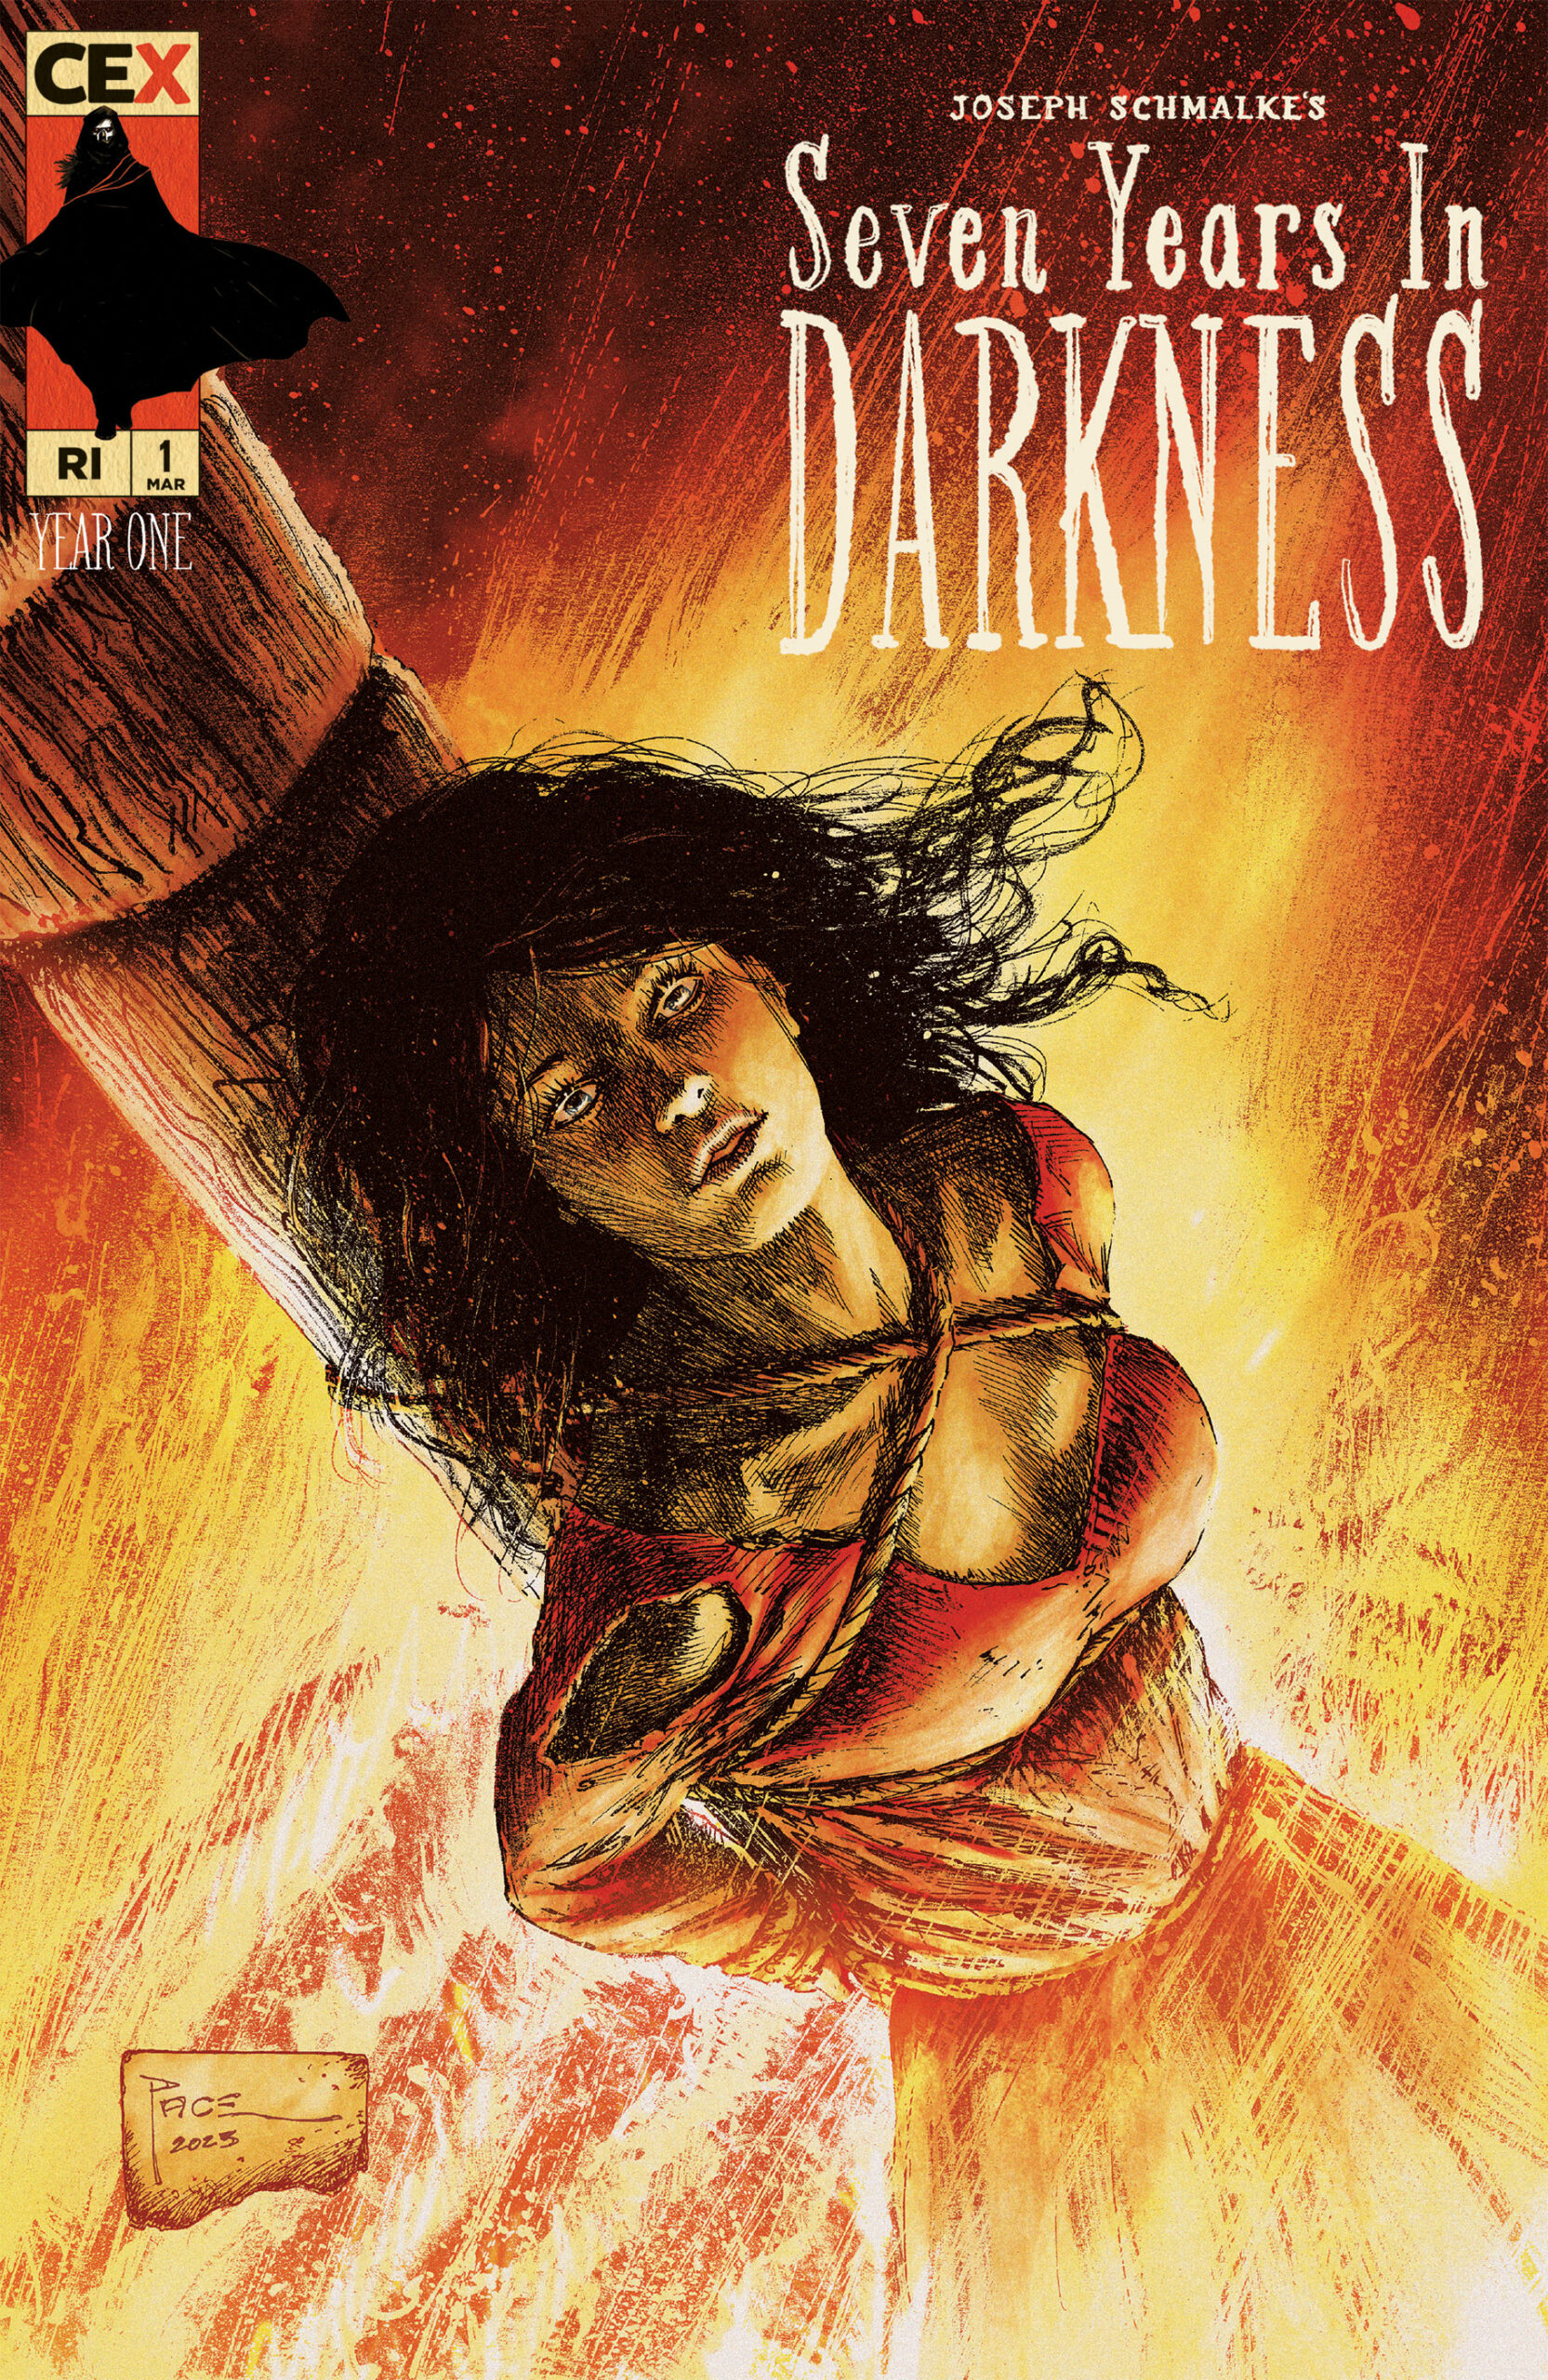 Seven Years in Darkness #1 - The One Stop Shop Variant